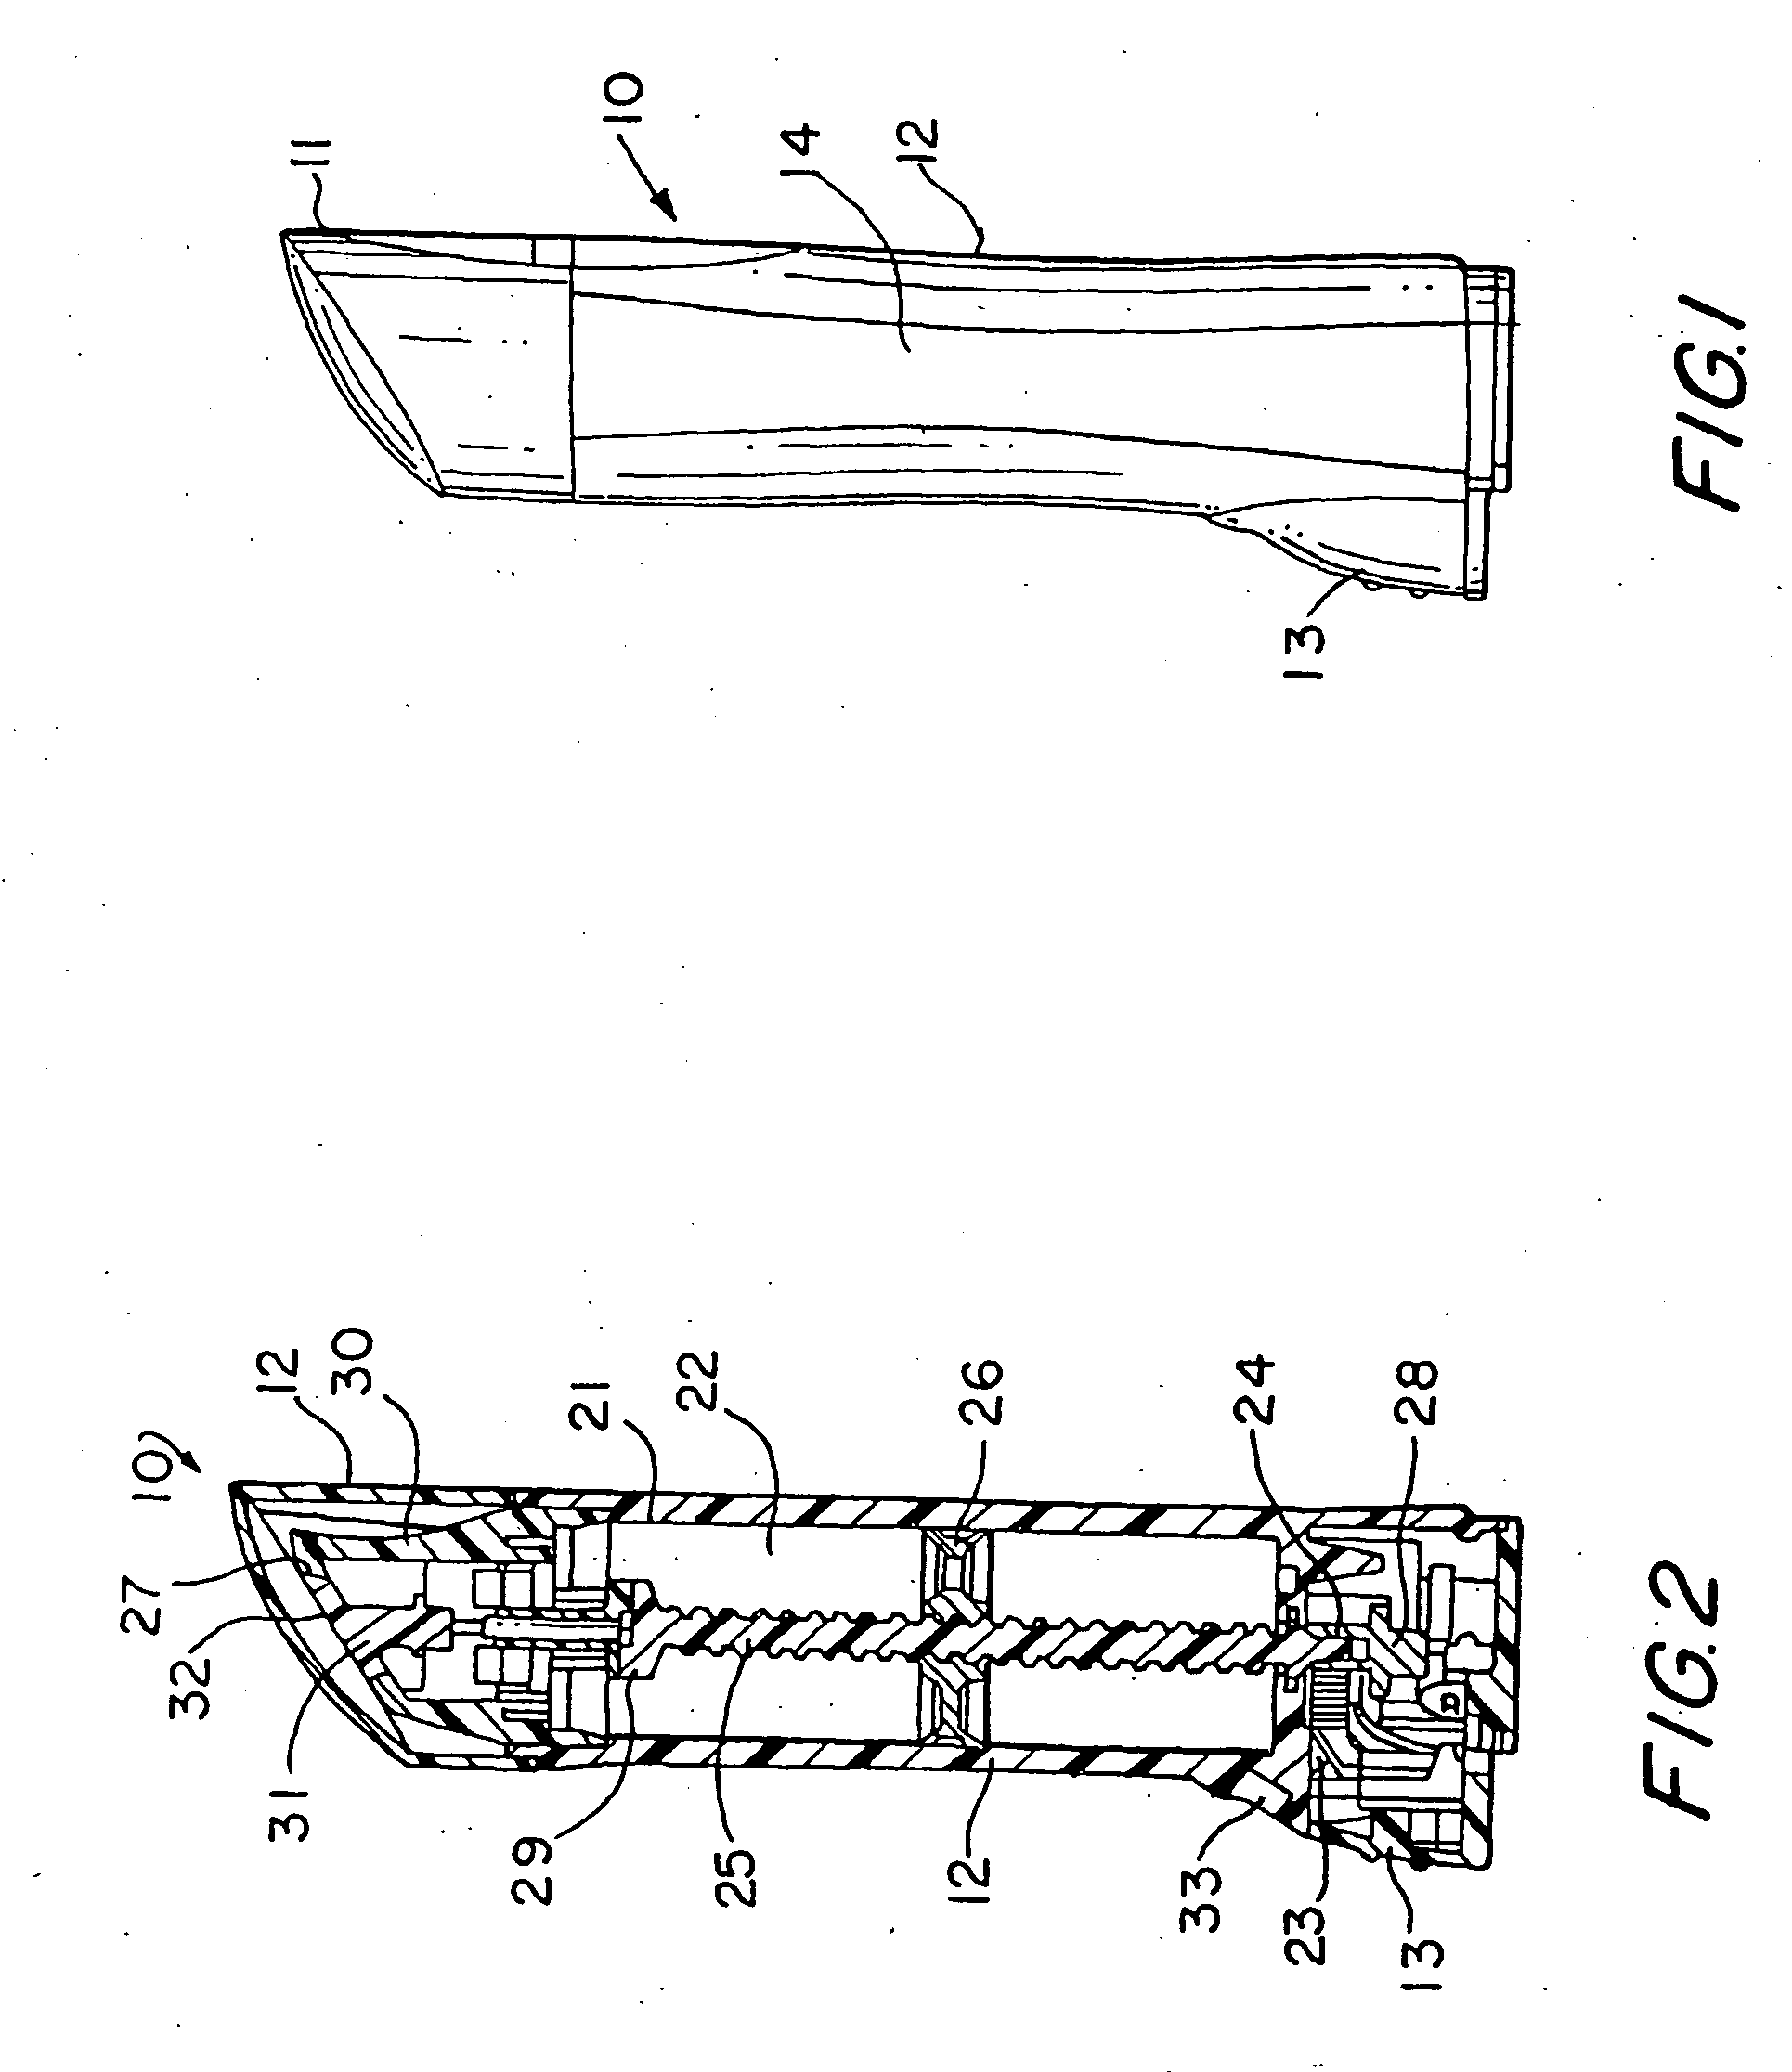 Topical administration device